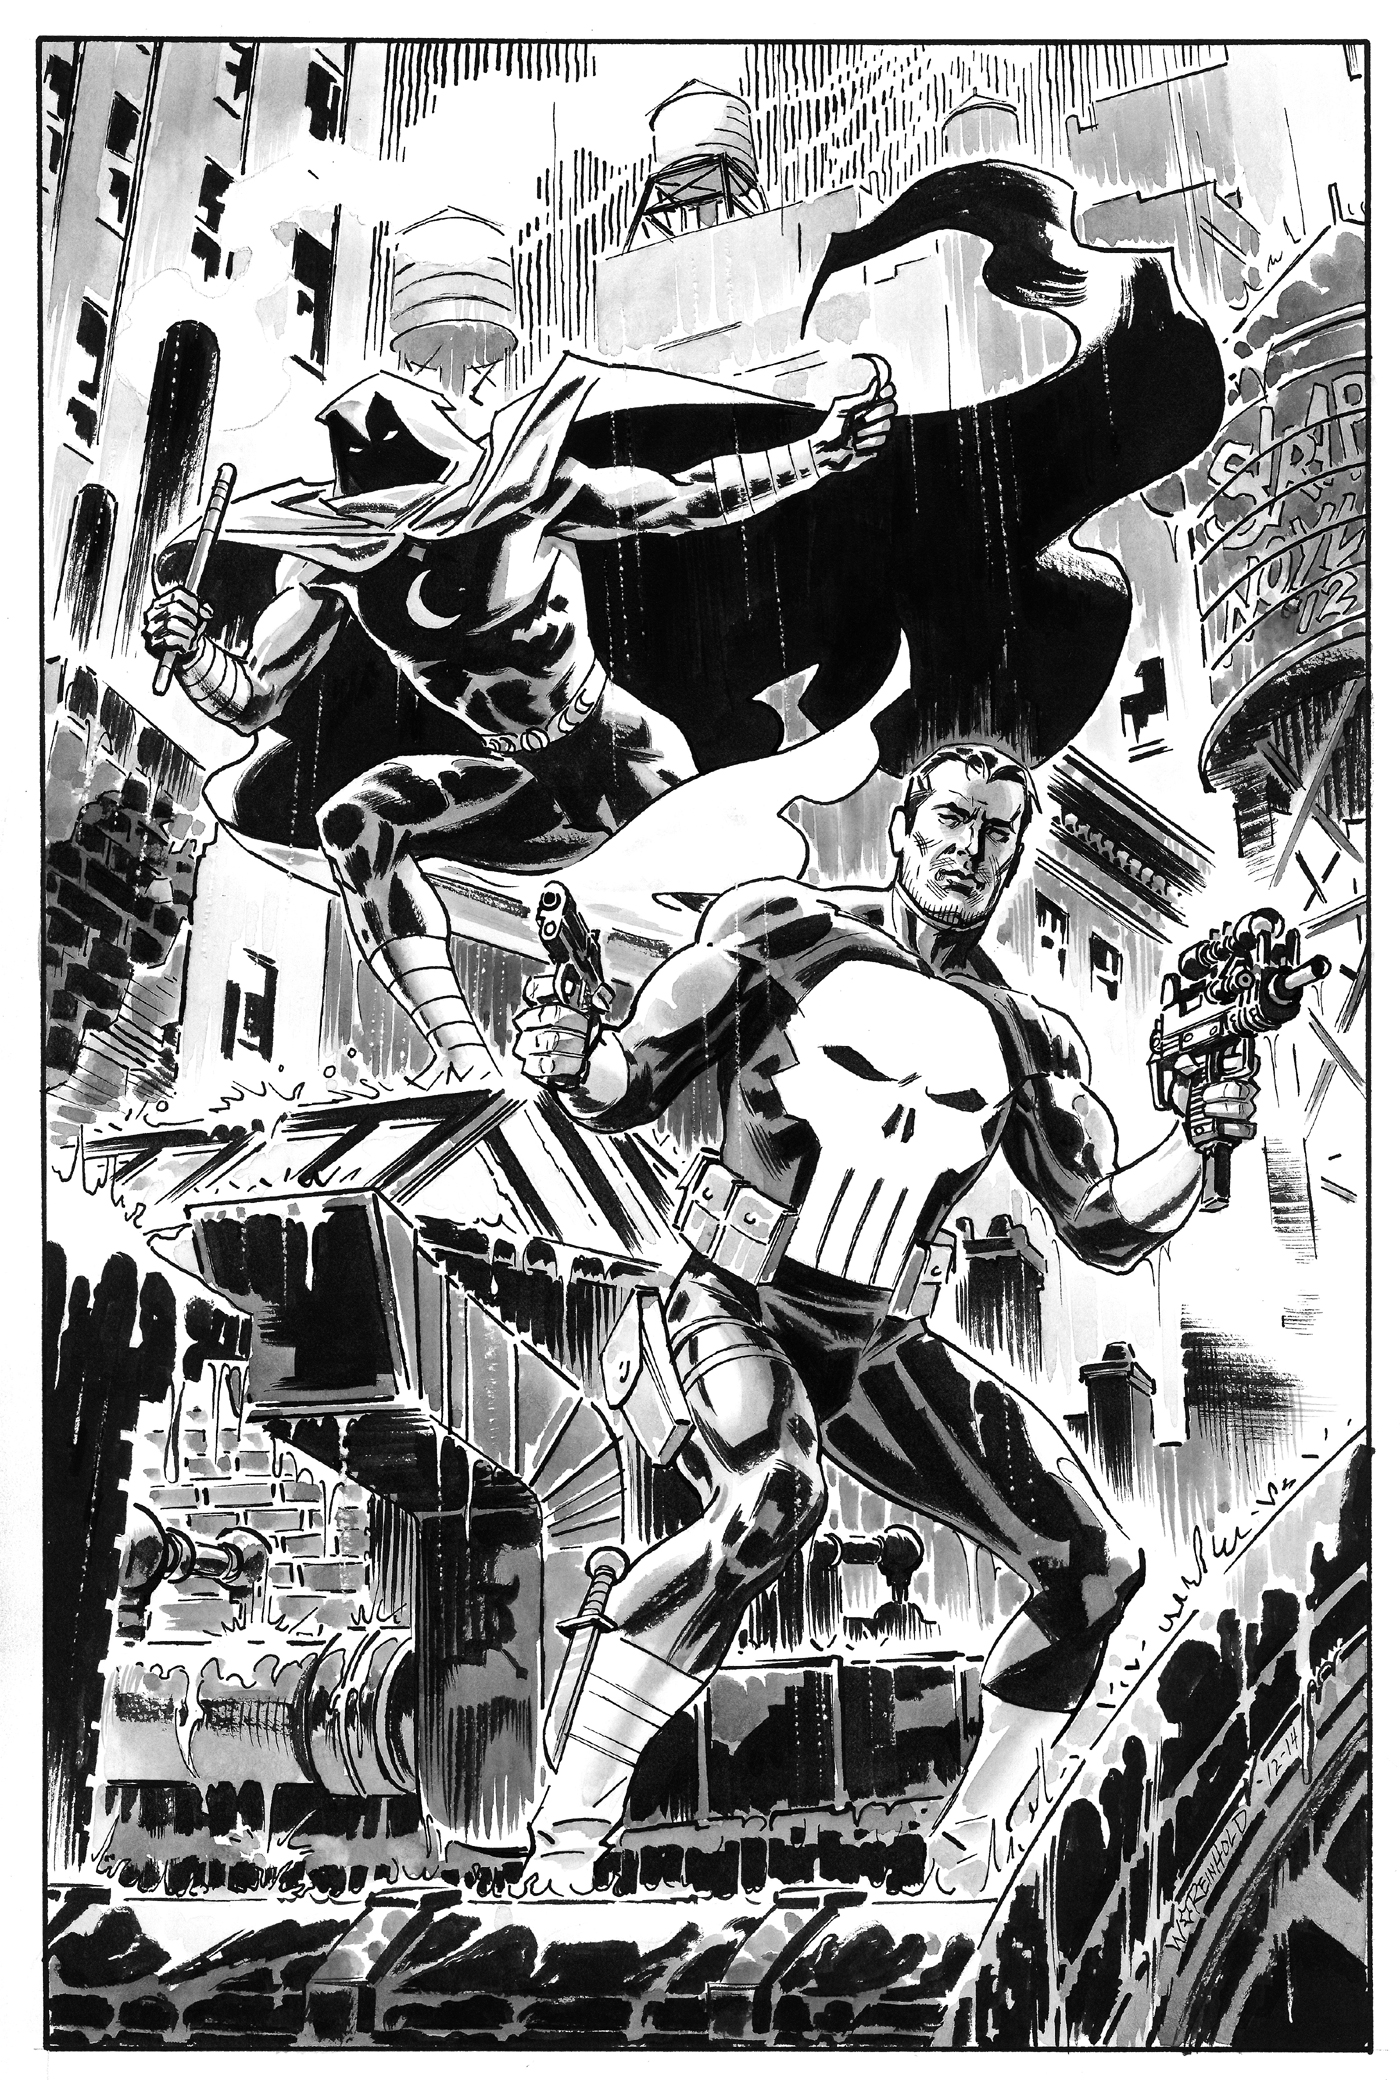 The Punisher HQ - The Punisher and Moon Knight. #punisher